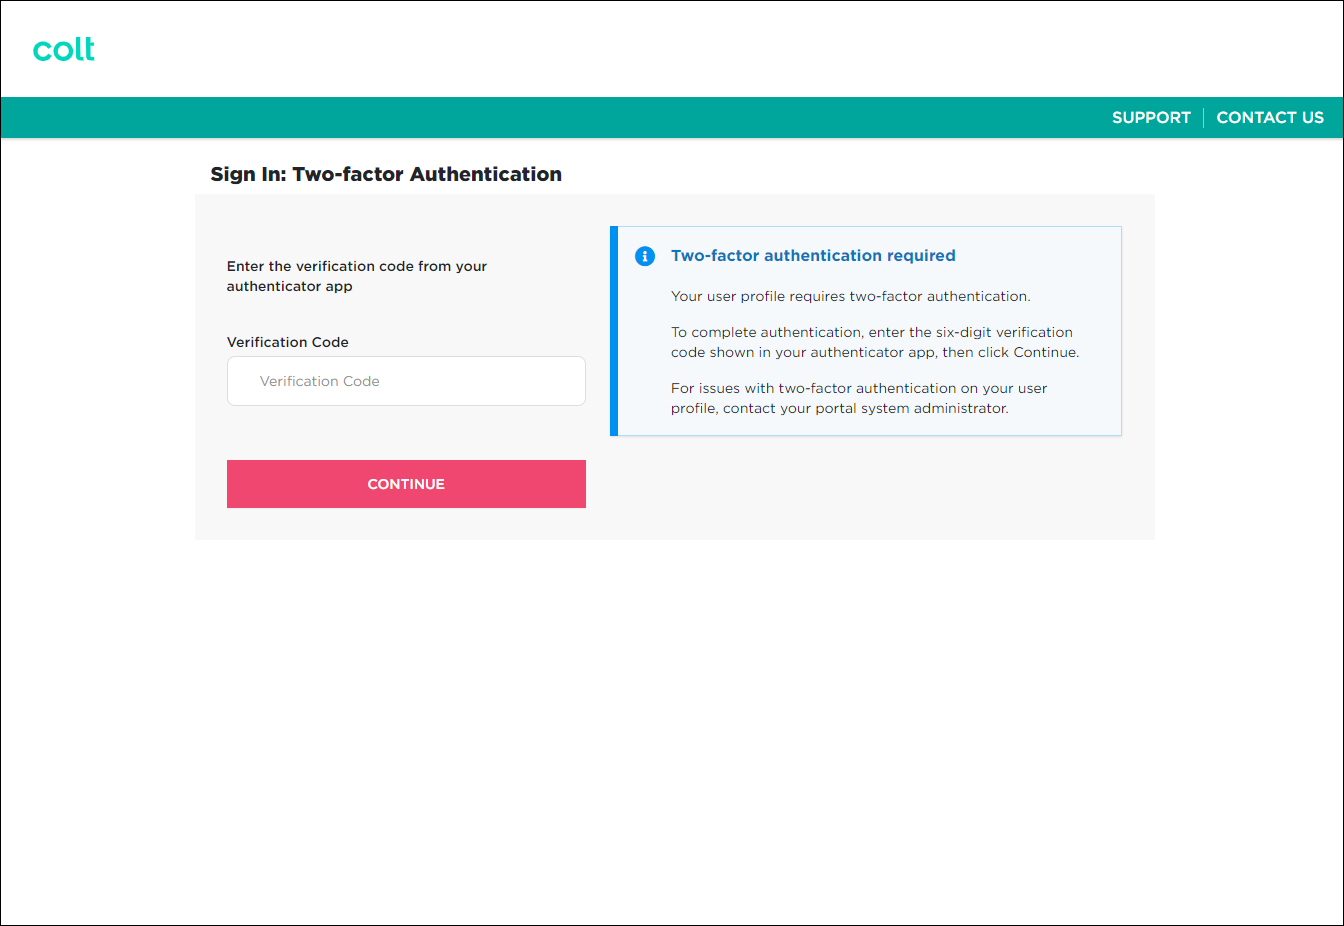 Sign In: Two-factor Authentication